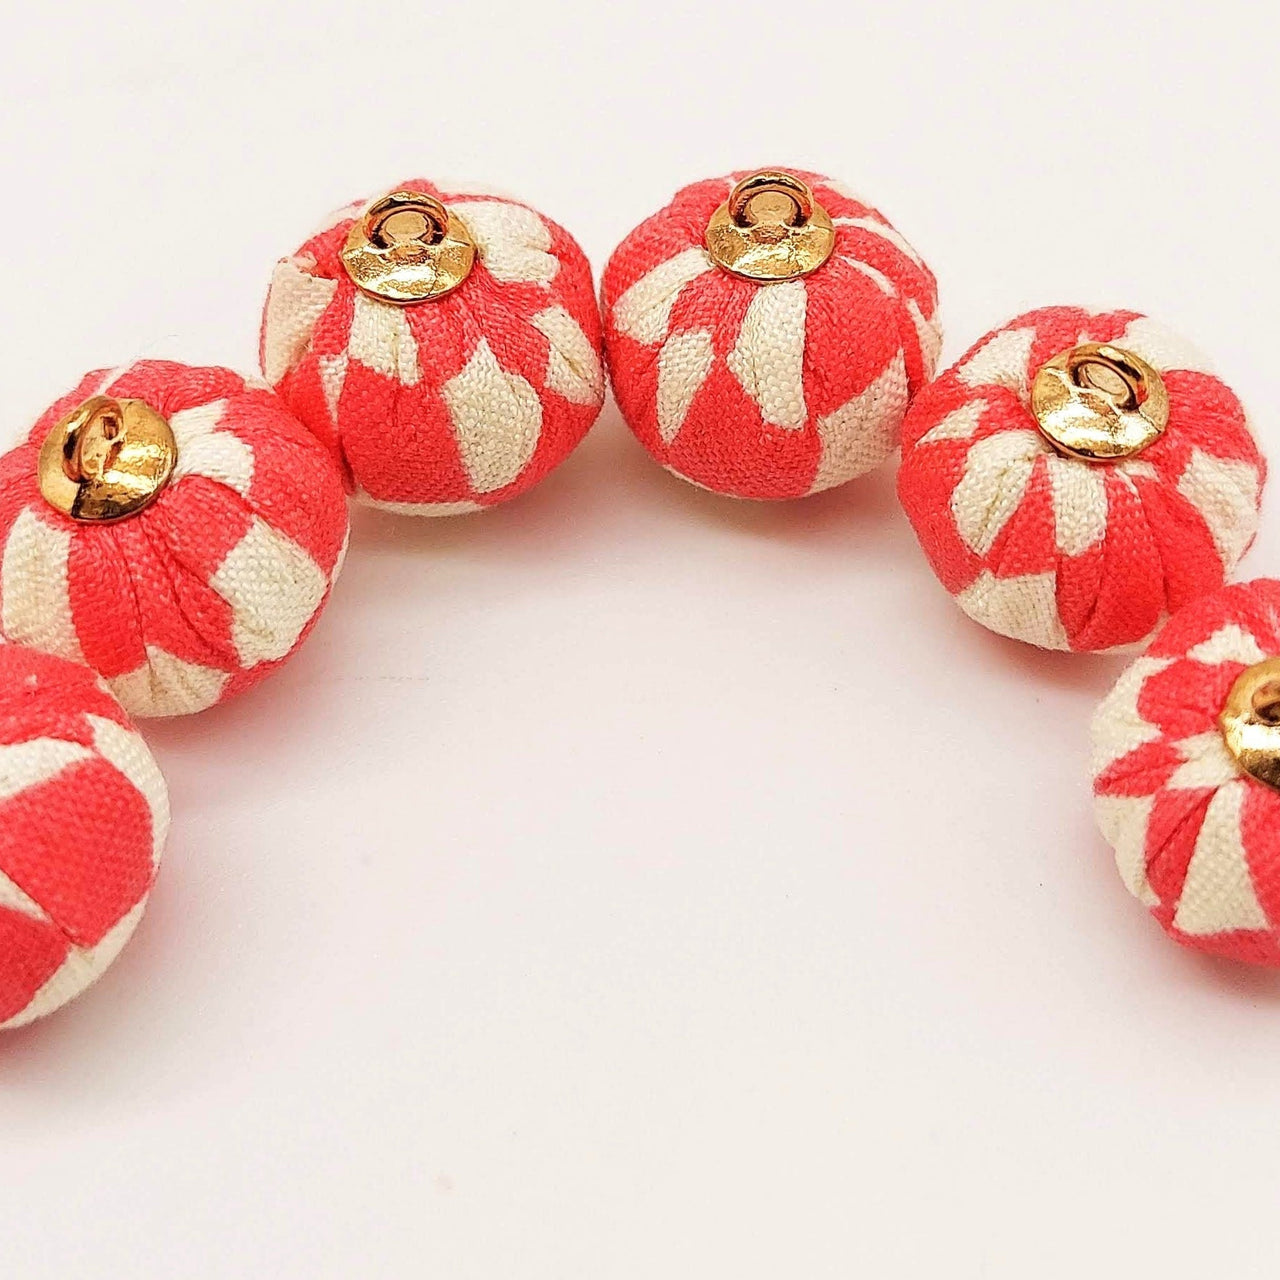 Red and White Checkered Cotton Fabric Balls Tassel, Button with Ring Cap, Decorative Tassels